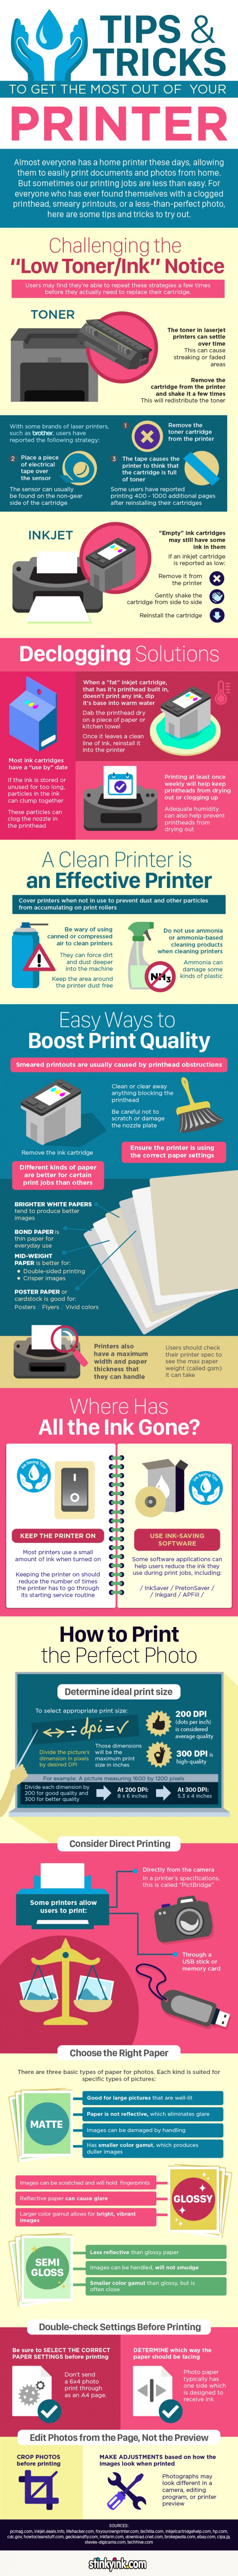 Tips And Tricks To Get The Most Out Of Your Printer